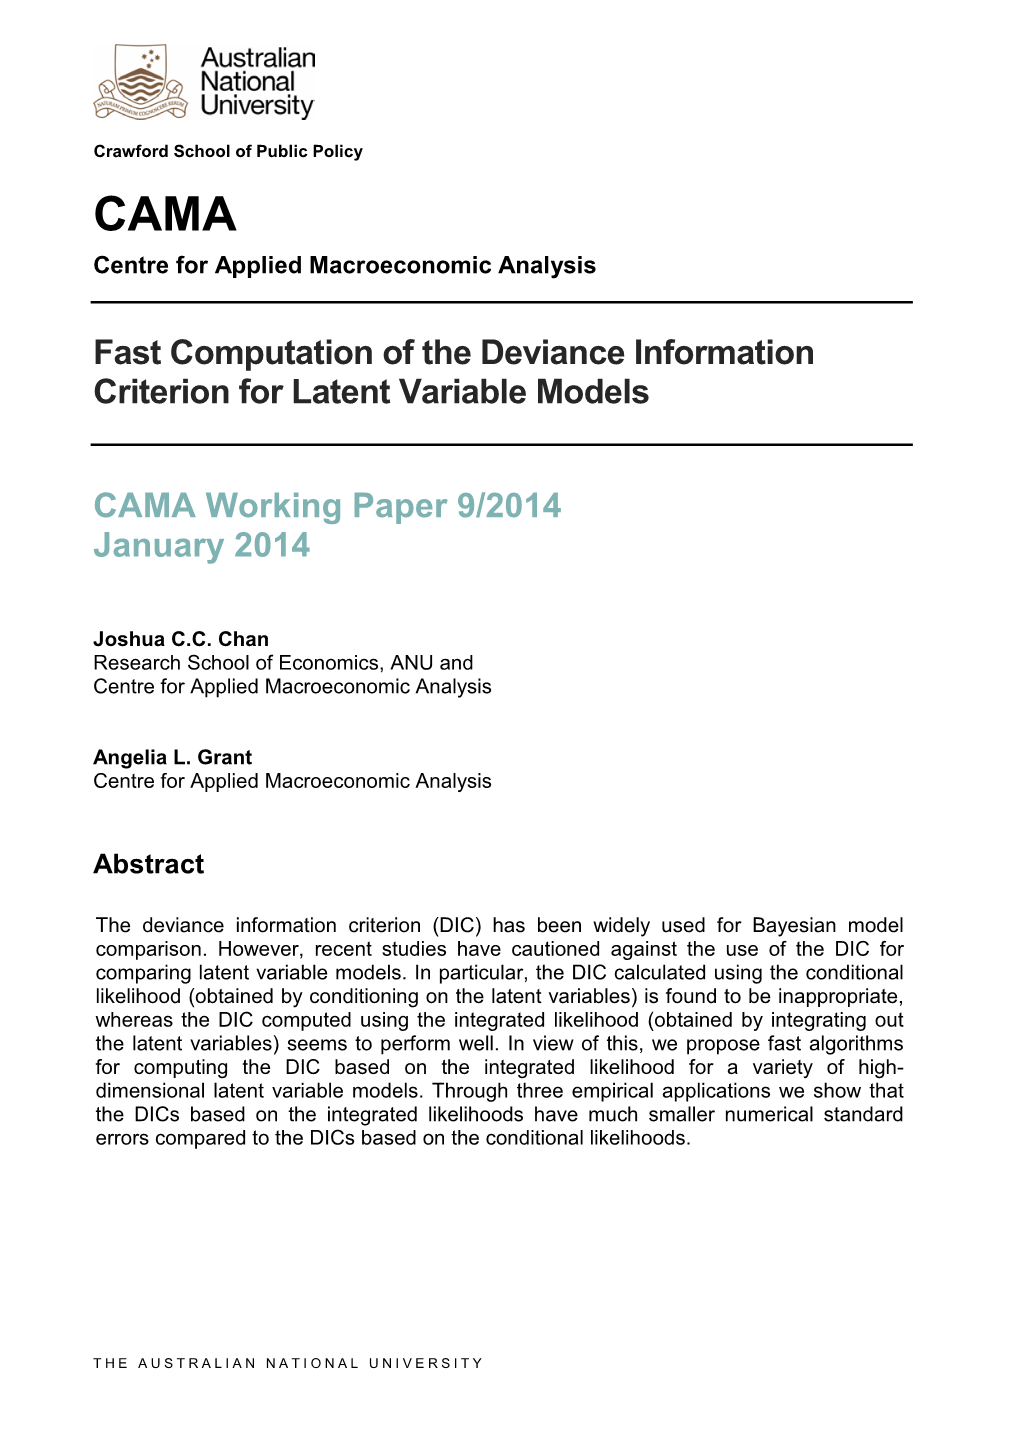 Fast Computation of the Deviance Information Criterion for Latent Variable Models